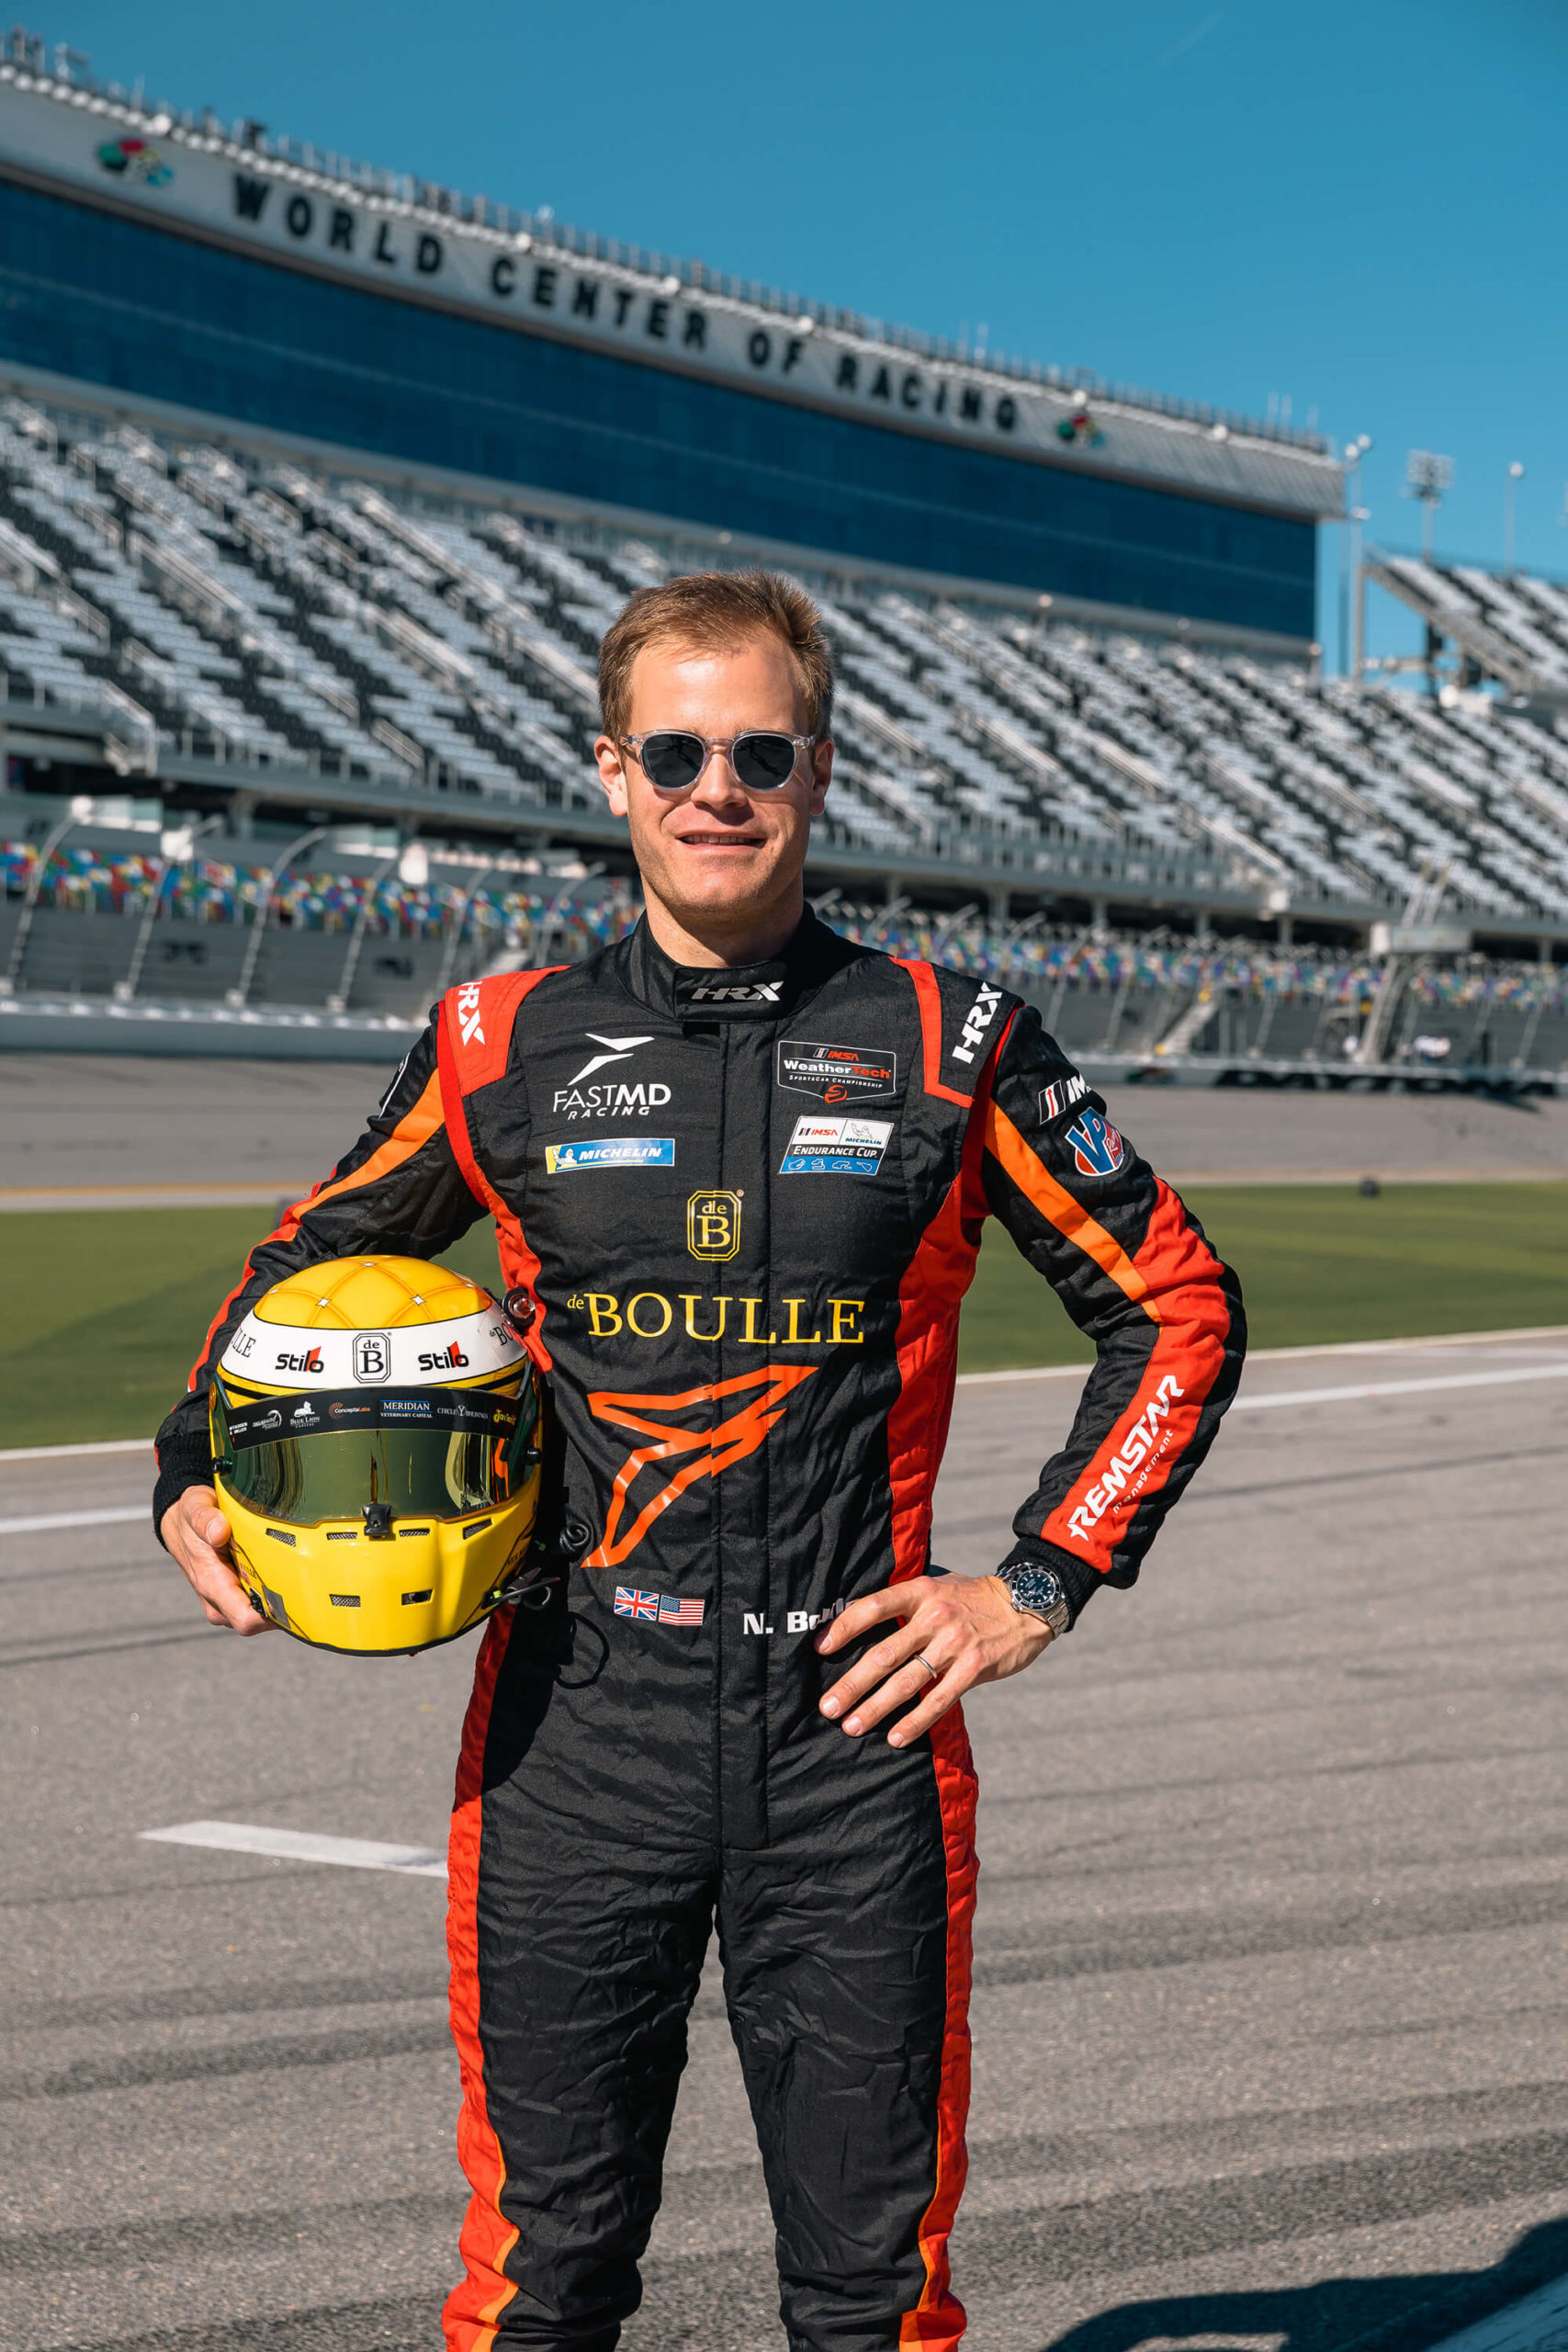 Nick Boulle Joins FASTMD Racing at the 2023 Rolex 24 Hours at Daytona Blog, Motorsports, News & Events